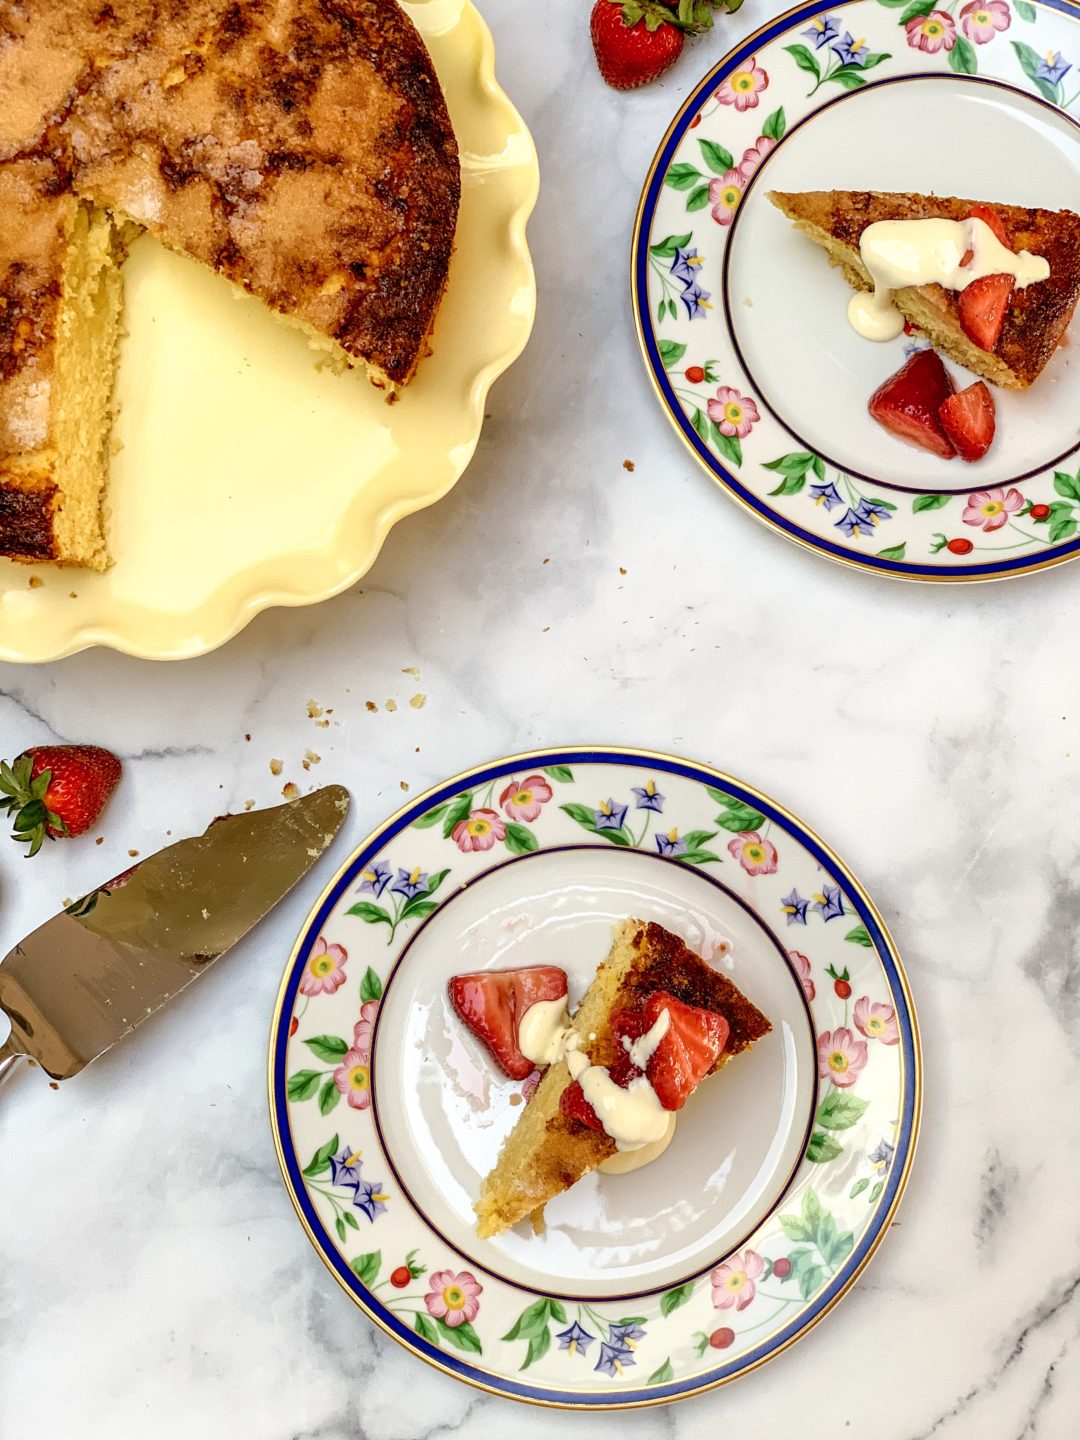 citrus olive oil cake with sweetened strawberries and whipped ricotta